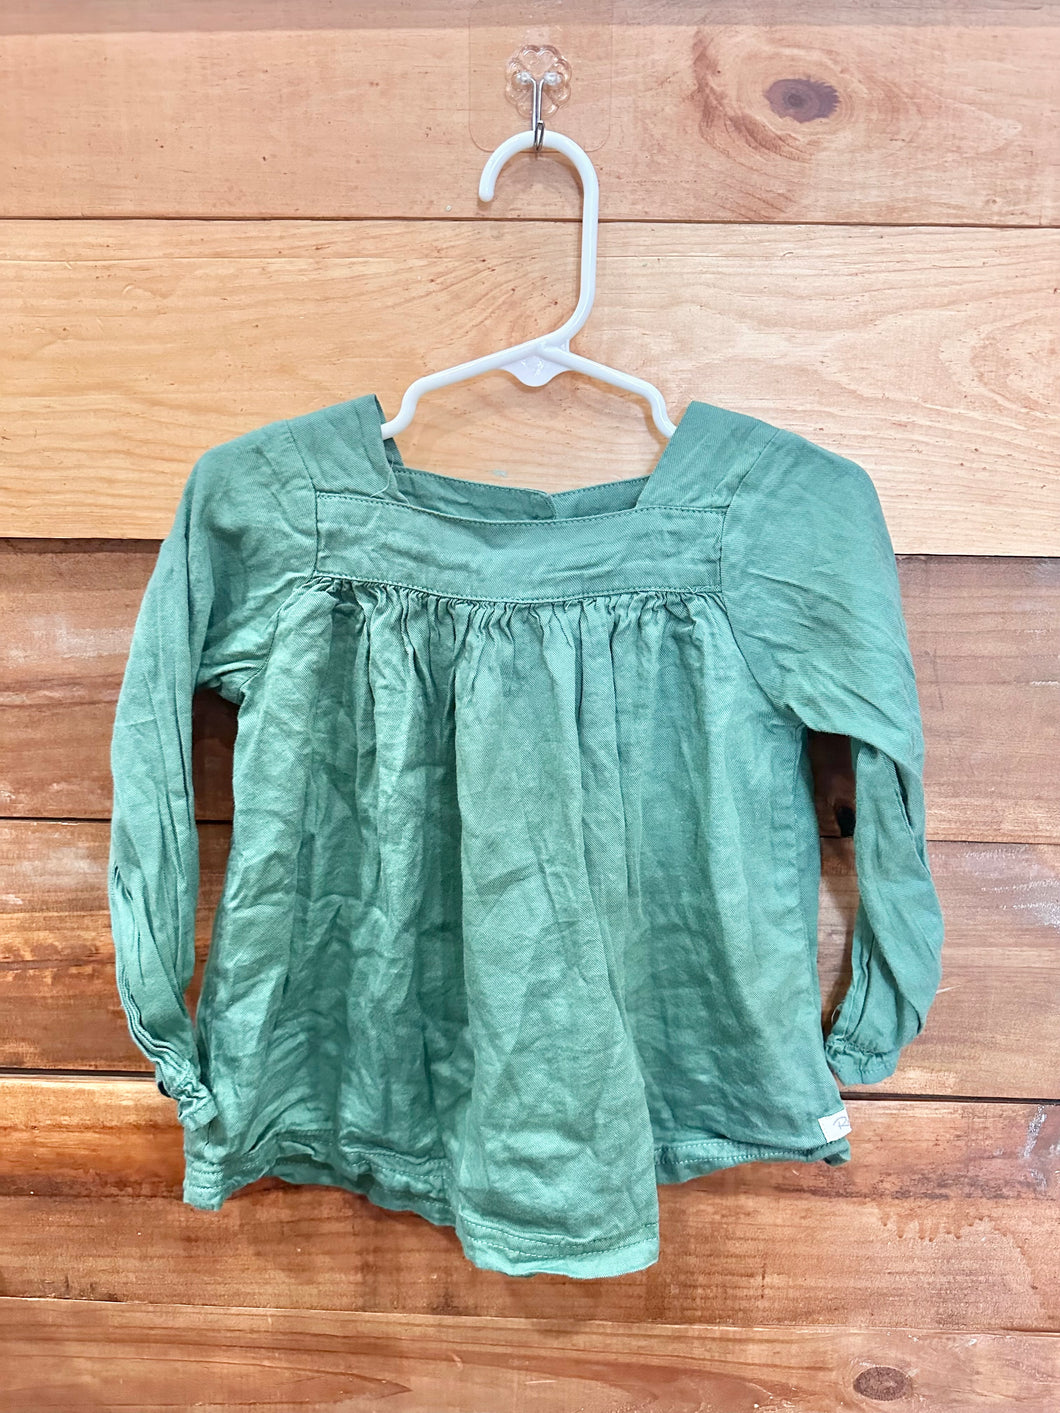 Ruffle Butts Green Top Size 3T